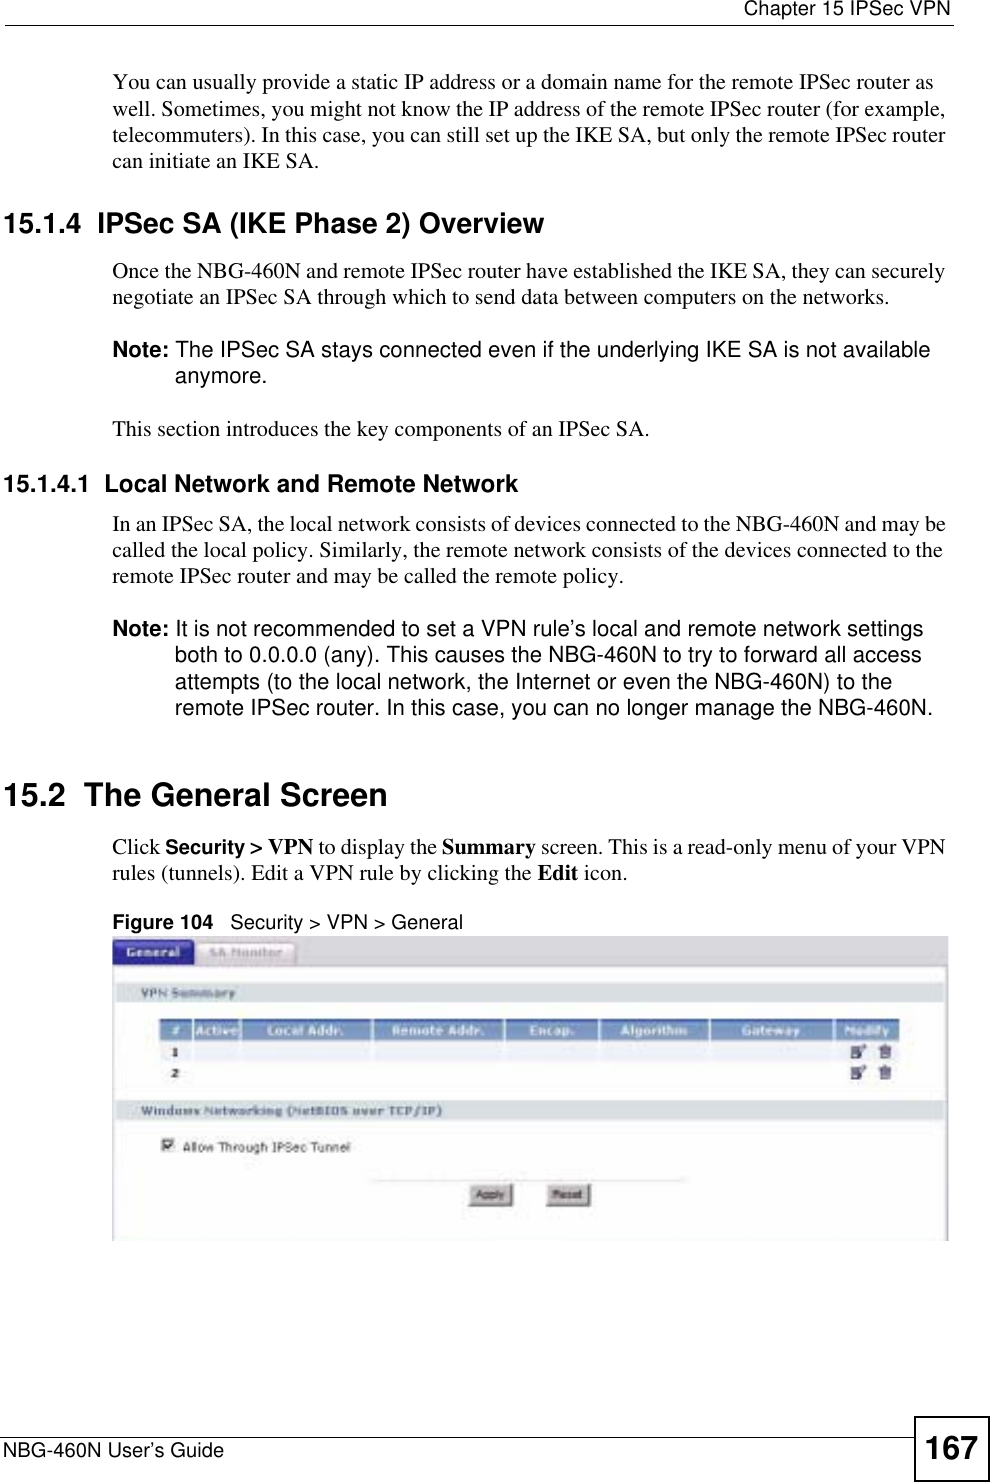  Chapter 15 IPSec VPNNBG-460N User’s Guide 167You can usually provide a static IP address or a domain name for the remote IPSec router as well. Sometimes, you might not know the IP address of the remote IPSec router (for example, telecommuters). In this case, you can still set up the IKE SA, but only the remote IPSec router can initiate an IKE SA.15.1.4  IPSec SA (IKE Phase 2) OverviewOnce the NBG-460N and remote IPSec router have established the IKE SA, they can securely negotiate an IPSec SA through which to send data between computers on the networks.Note: The IPSec SA stays connected even if the underlying IKE SA is not available anymore.This section introduces the key components of an IPSec SA.15.1.4.1  Local Network and Remote NetworkIn an IPSec SA, the local network consists of devices connected to the NBG-460N and may be called the local policy. Similarly, the remote network consists of the devices connected to the remote IPSec router and may be called the remote policy.Note: It is not recommended to set a VPN rule’s local and remote network settings both to 0.0.0.0 (any). This causes the NBG-460N to try to forward all access attempts (to the local network, the Internet or even the NBG-460N) to the remote IPSec router. In this case, you can no longer manage the NBG-460N.15.2  The General ScreenClick Security &gt; VPN to display the Summary screen. This is a read-only menu of your VPN rules (tunnels). Edit a VPN rule by clicking the Edit icon.Figure 104   Security &gt; VPN &gt; General